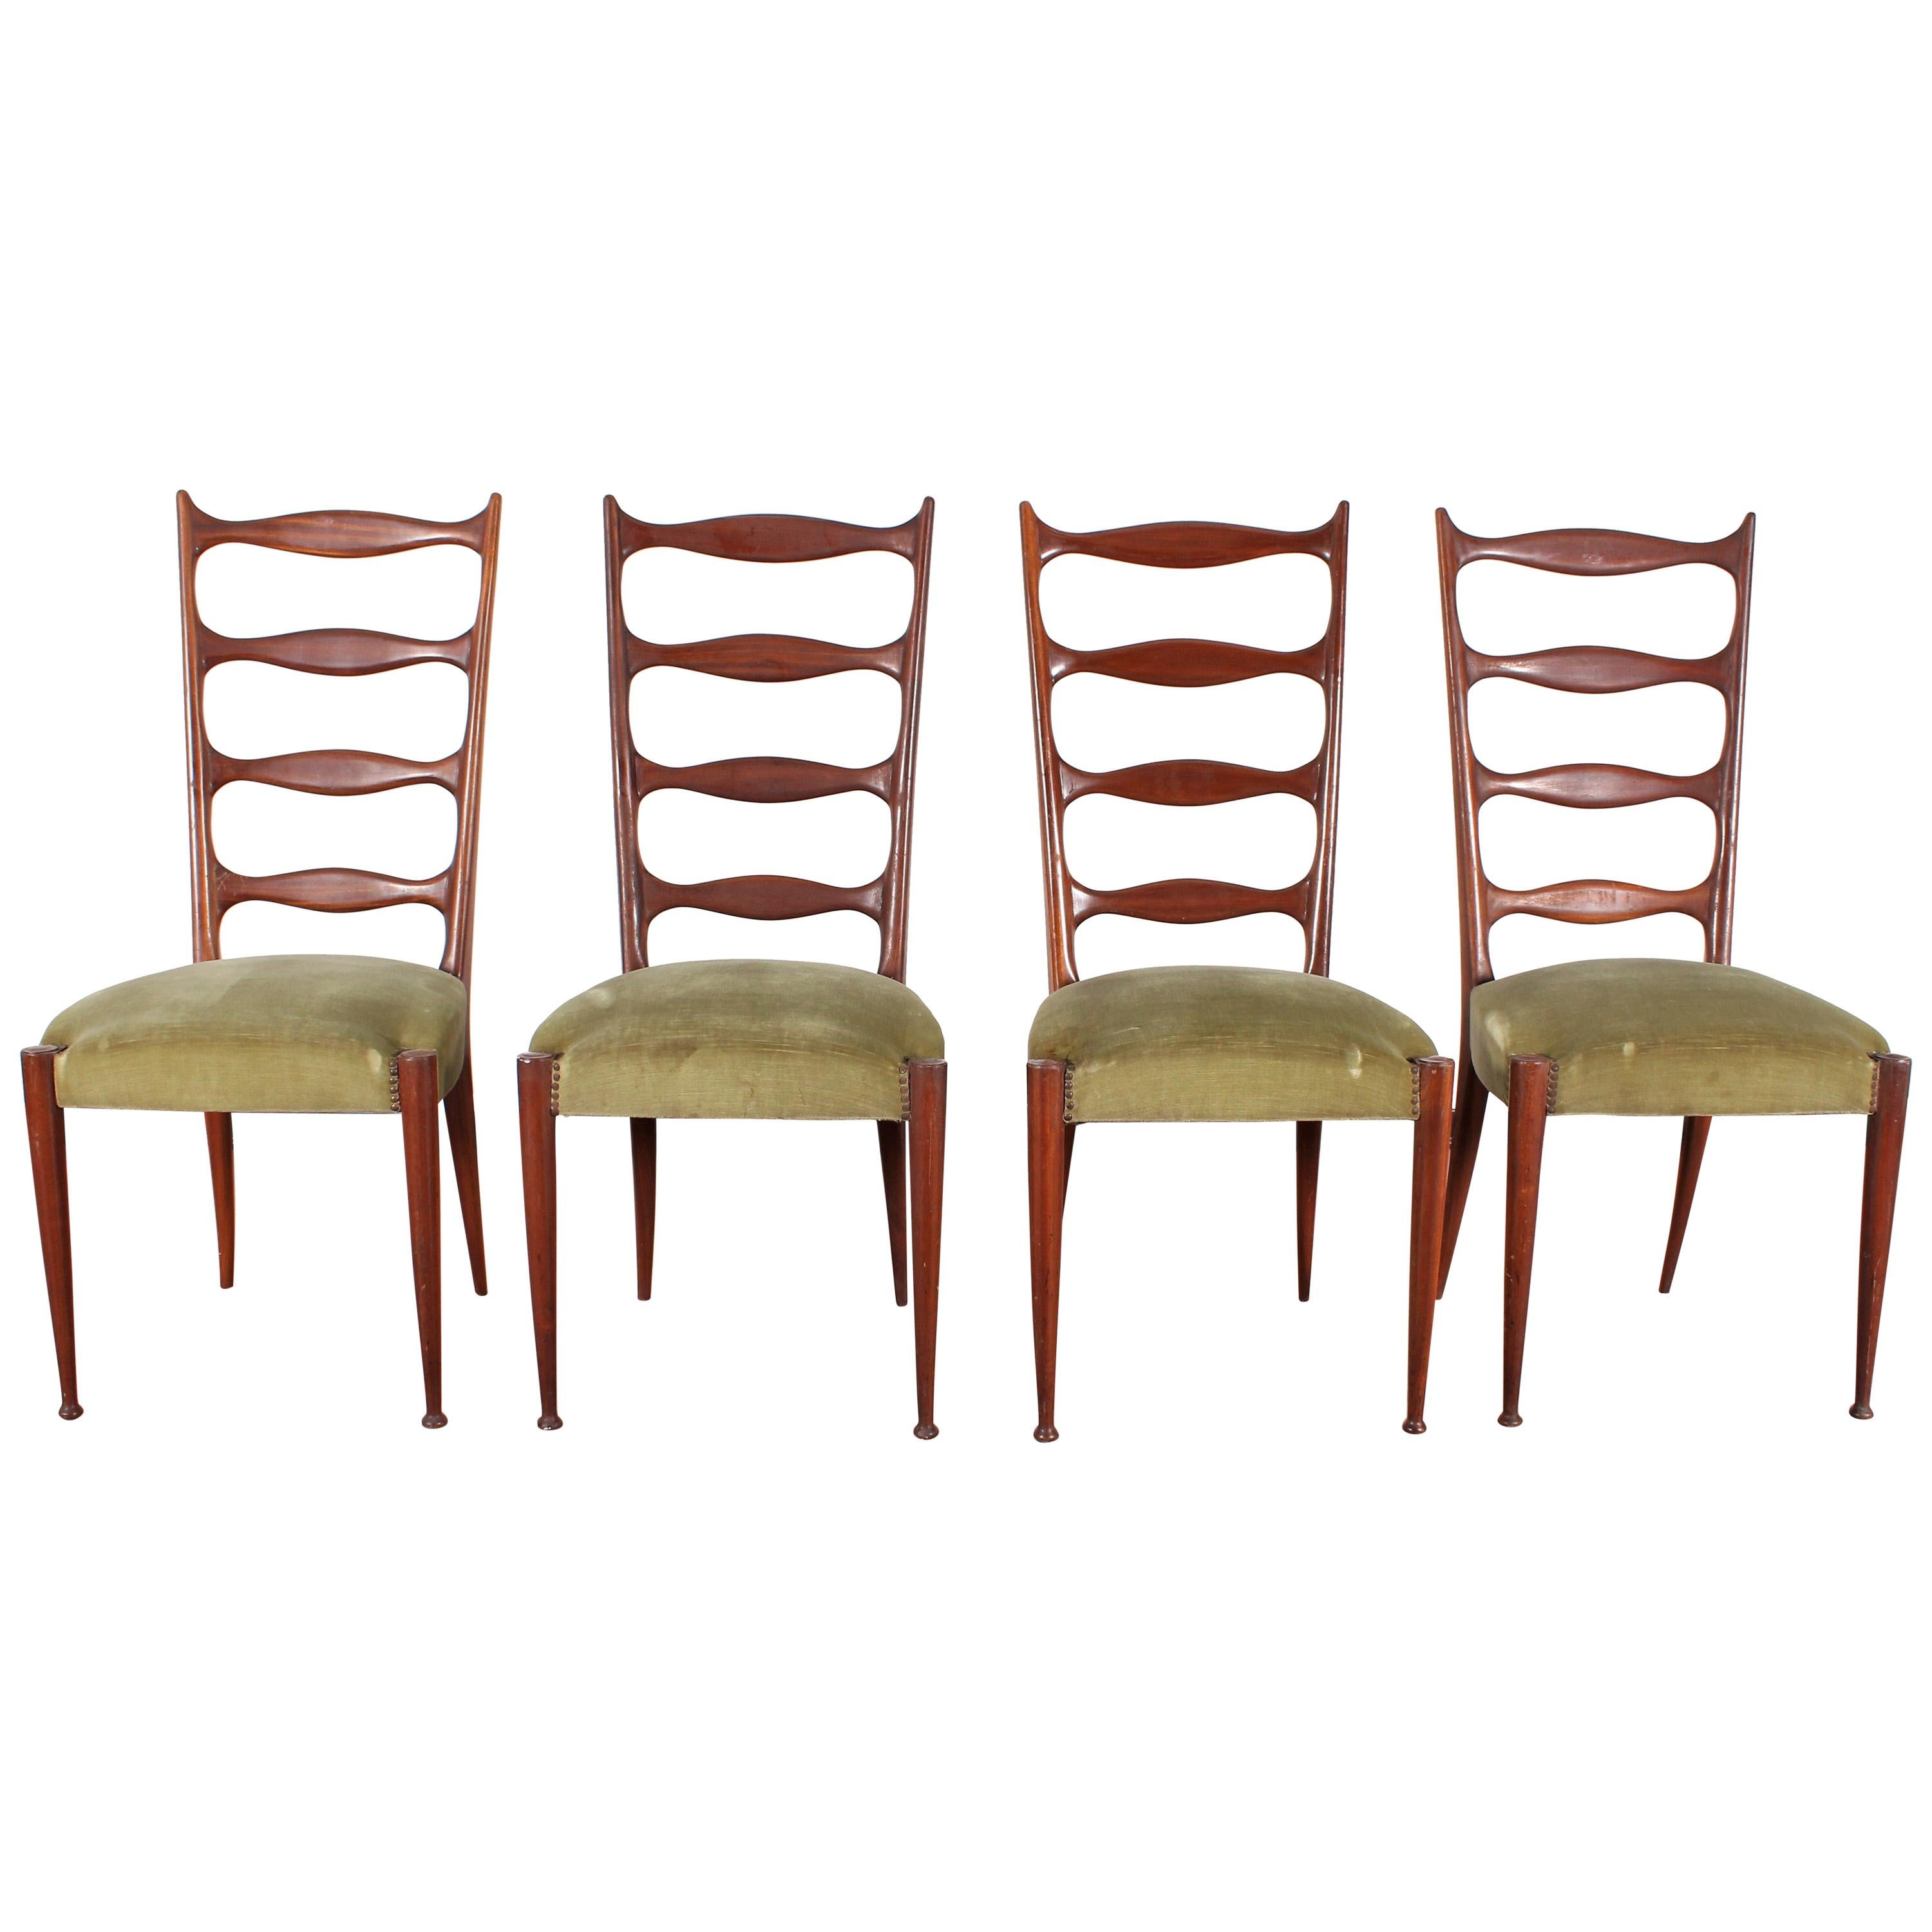 Midcentury Paolo Buffa Style High Espalier Dining Chairs, Set of 4, 1950s, Italy